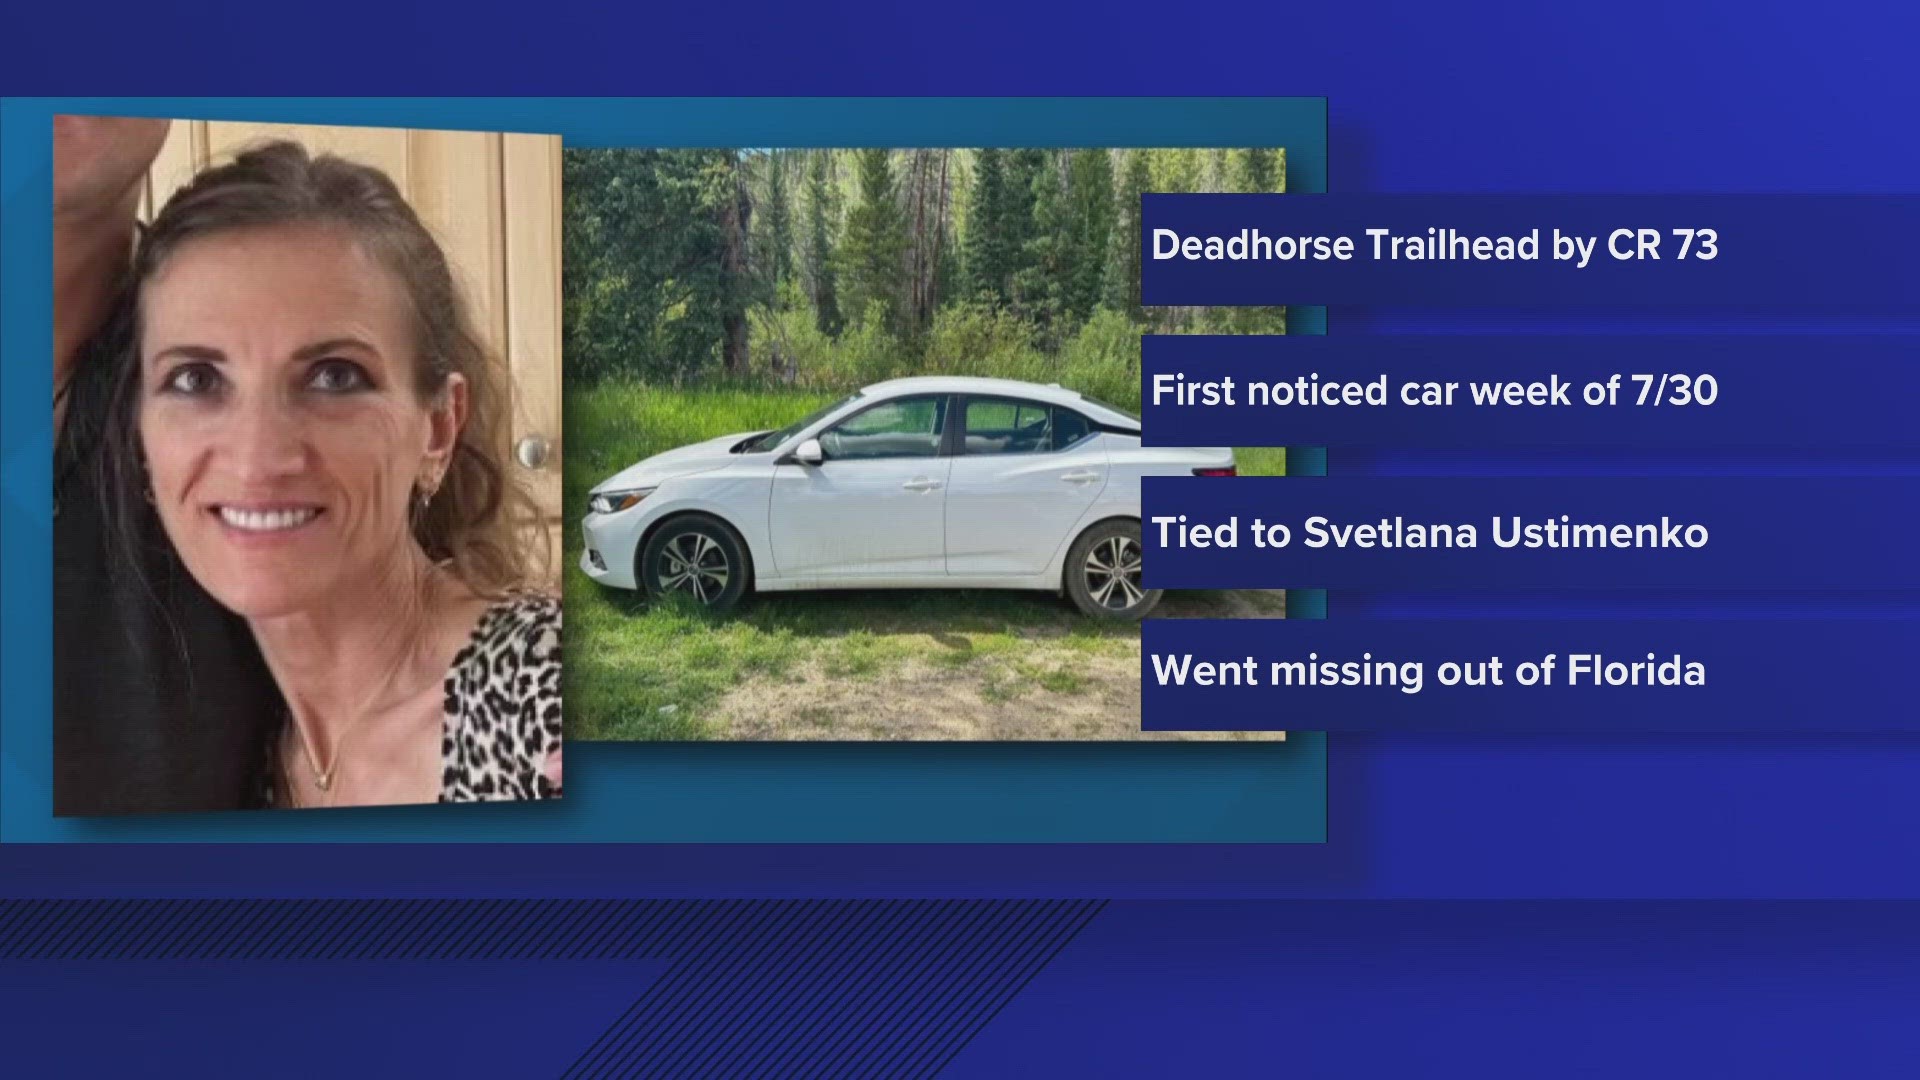 Multiple agencies searched the Deadhorse Trailhead area Friday, Saturday and Sunday but could not find Svetlana Ustimenko, the sheriff's office said.